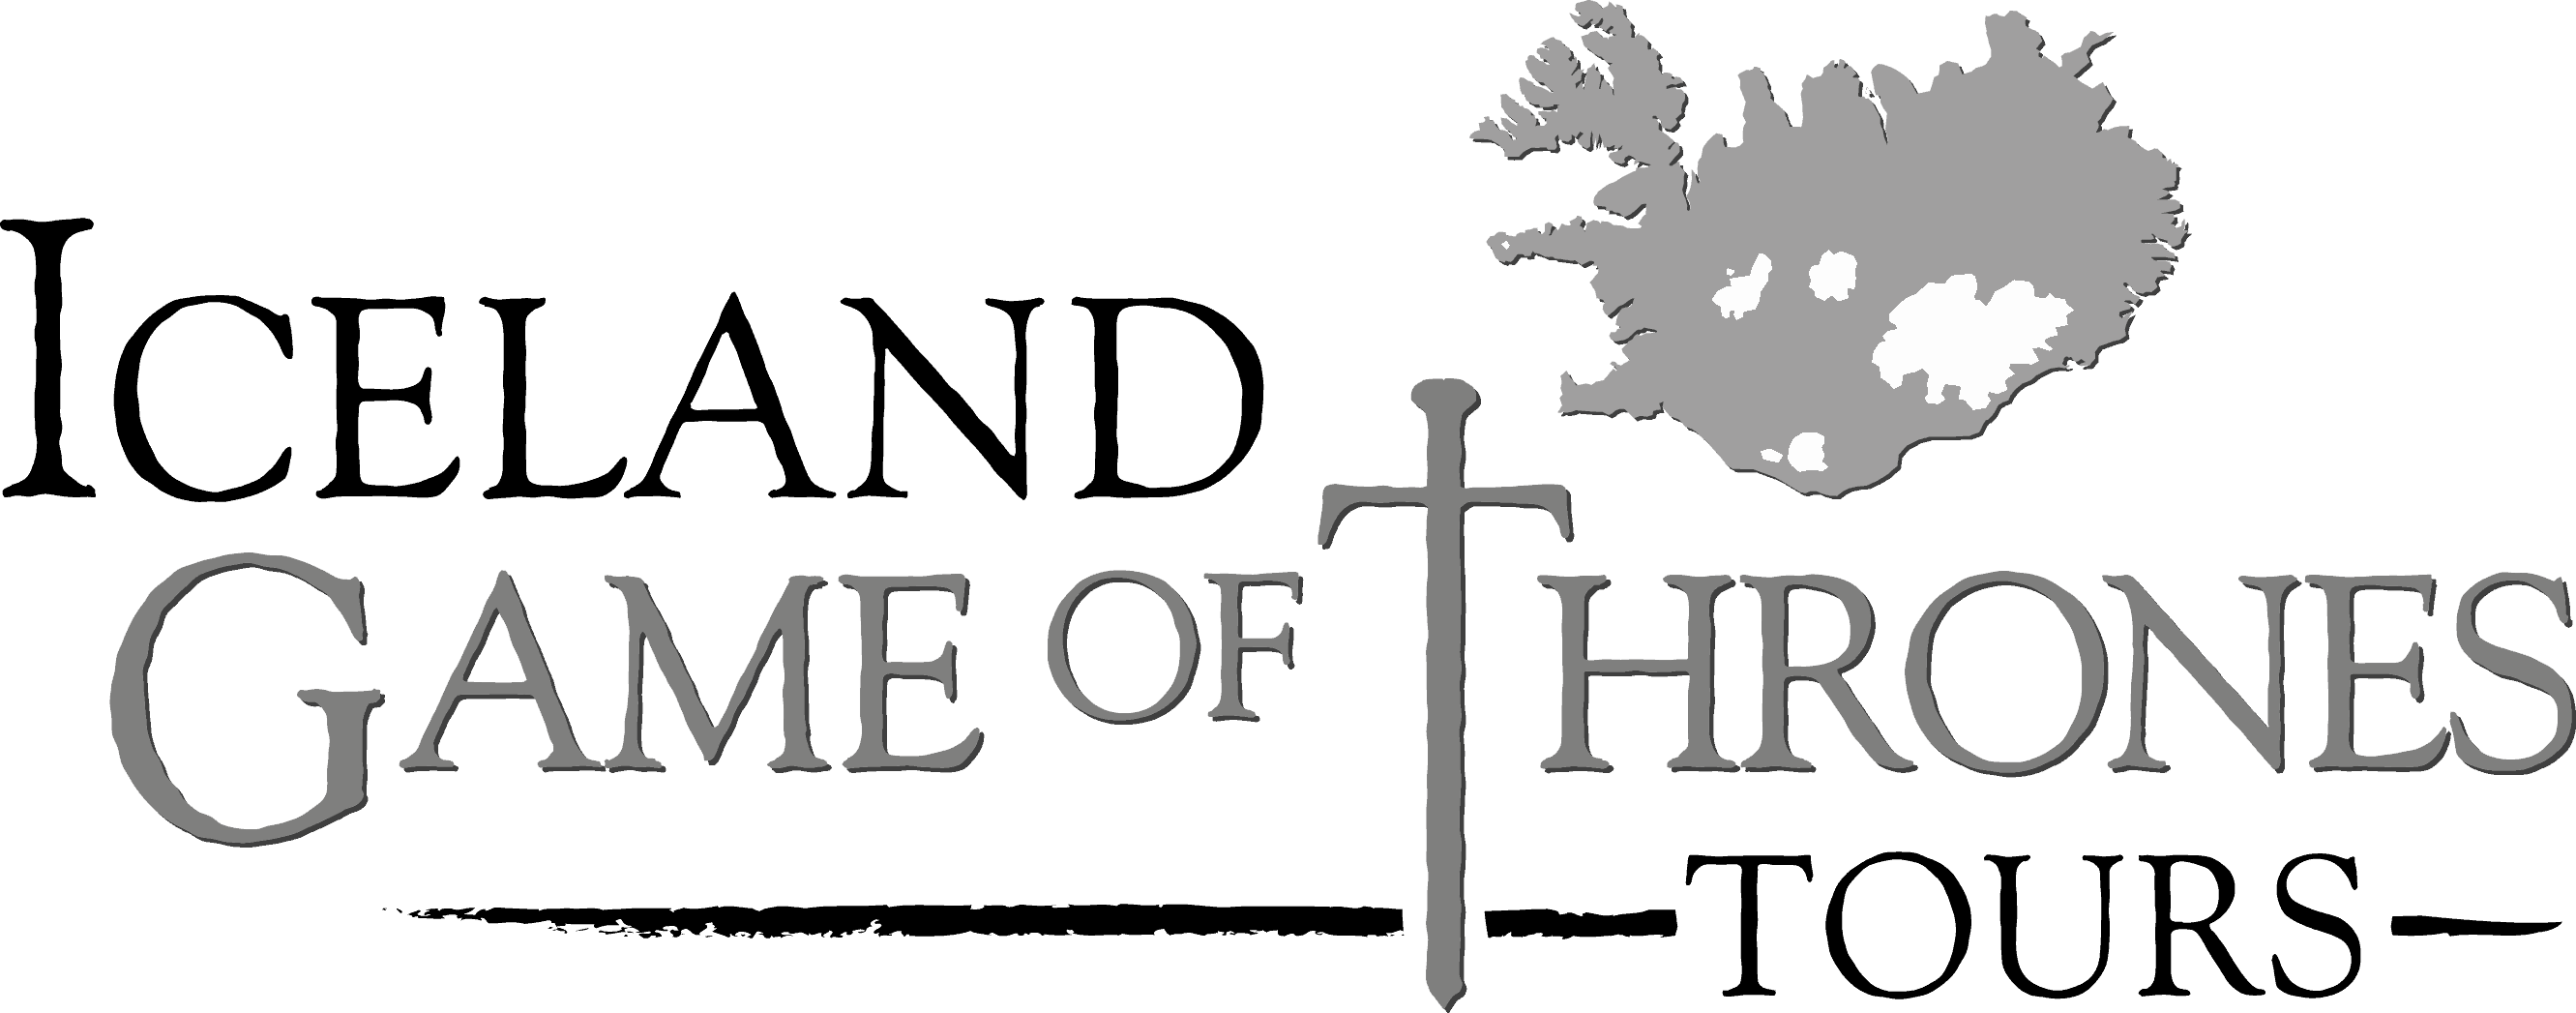 Iceland Game Of Thrones Tours - Iceland Map (2663x1047)